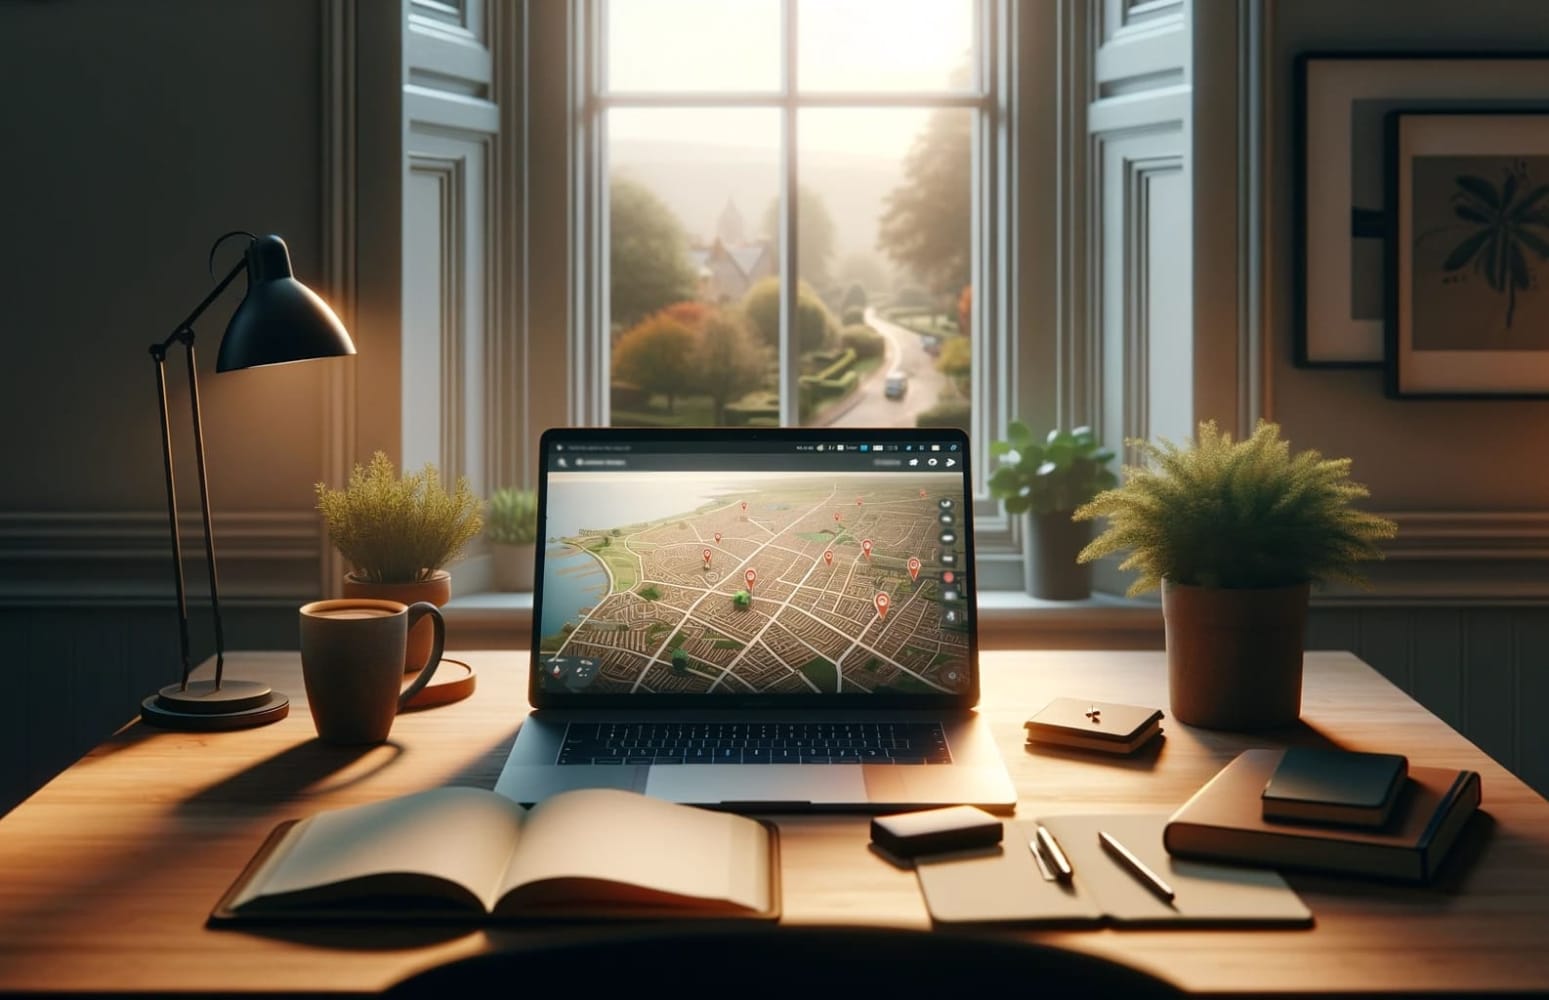 A laptop standing on a wooden table by a window overlooking the city, a map with location tags open on the laptop